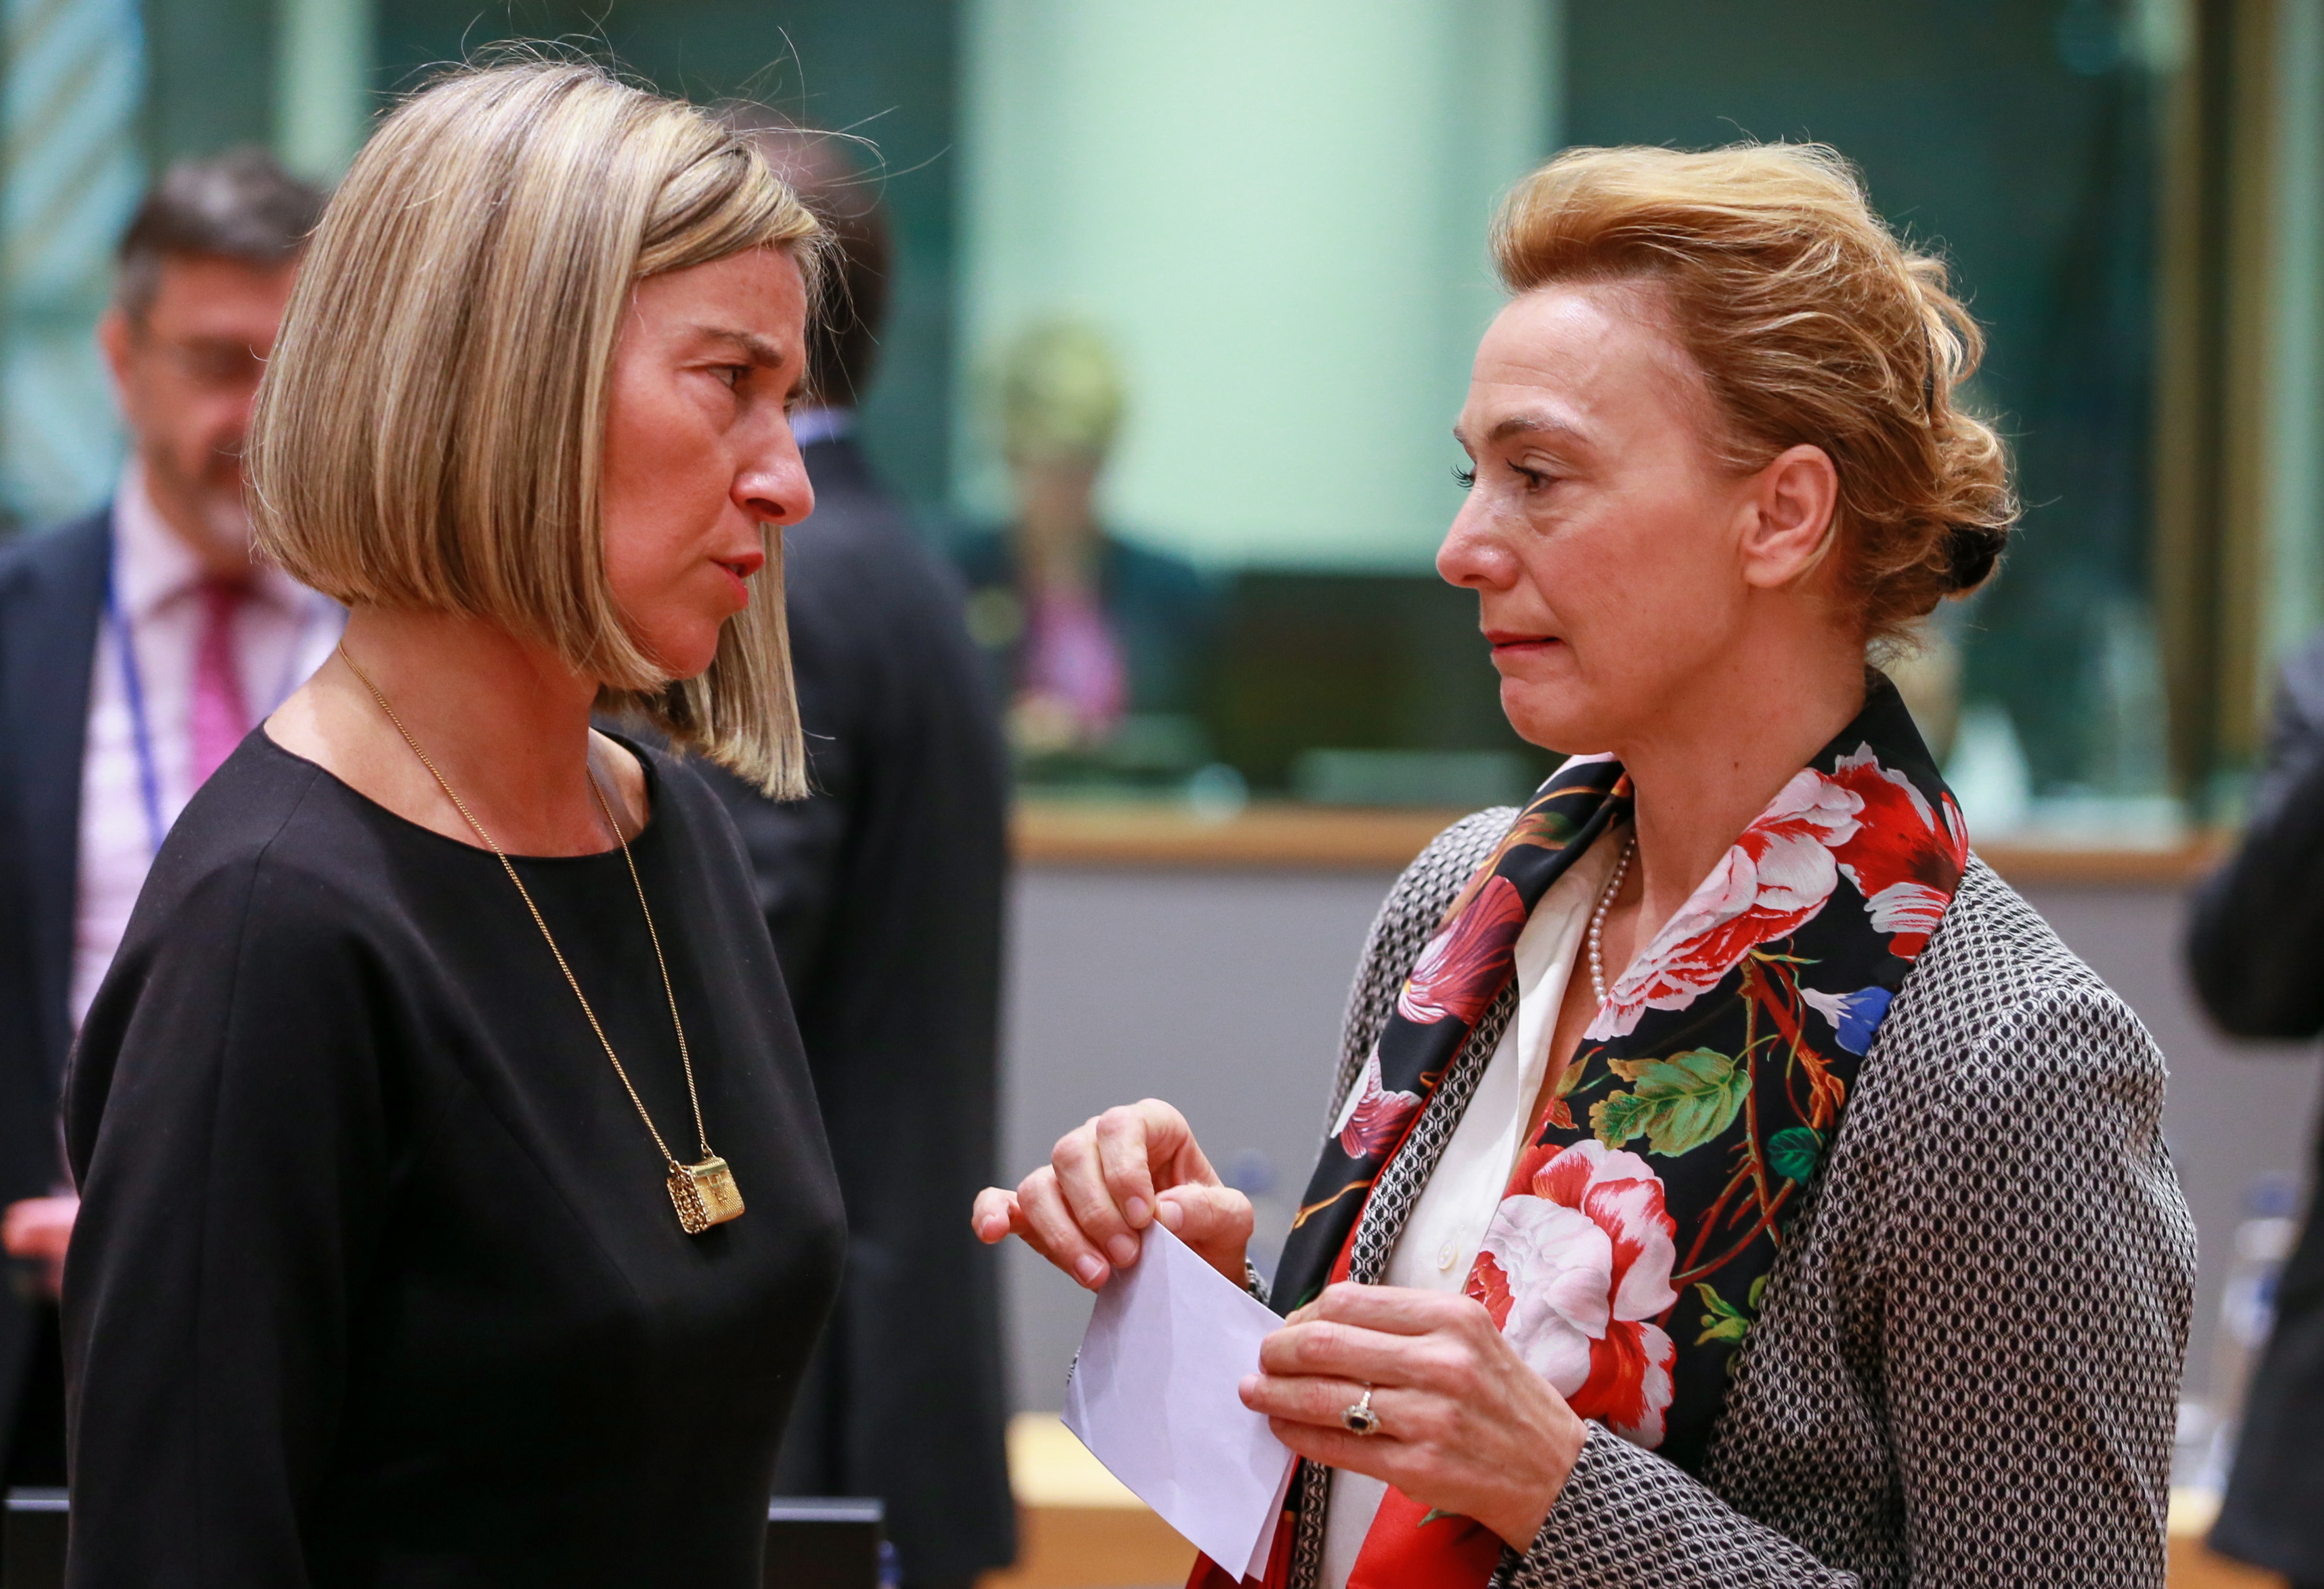 epa07176858 High Representative of the EU for Foreign Affairs and Security Policy, Federica Mogherini (L) and Deputy Prime Minister and Foreign Minister of Croatia Marija Pejcinovic Buric  at the start of a EU foreign affairs Council (FAC) at the European Council in Brussels, Belgium, 19 November 2018.  The foreign minister discuss issues related to Central Asia, Bosnia-Herzegovina, Iran and Yemen.  The foreign minister discuss issues related to Central Asia, Bosnia-Herzegovina, Iran and Yemen.  EPA/STEPHANIE LECOCQ